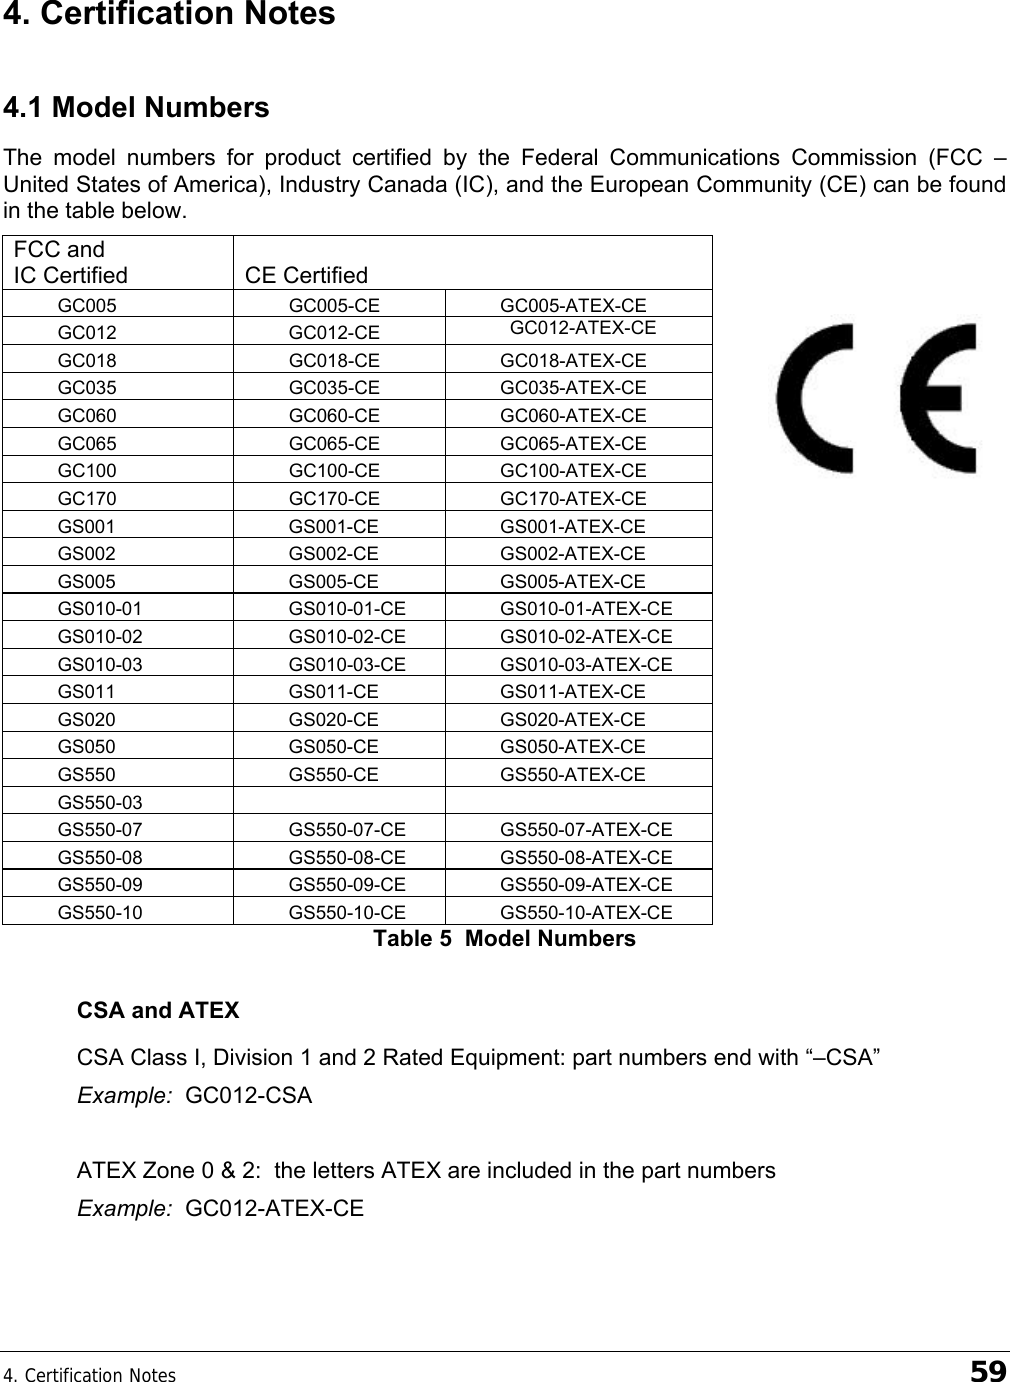 4. Certification Notes    59 4. Certification Notes 4.1 Model Numbers The model numbers for product certified by the Federal Communications Commission (FCC – United States of America), Industry Canada (IC), and the European Community (CE) can be found in the table below. FCC and  IC Certified  CE Certified GC005 GC005-CE GC005-ATEX-CE GC012 GC012-CE GC012-ATEX-CE GC018 GC018-CE GC018-ATEX-CE GC035 GC035-CE GC035-ATEX-CE GC060 GC060-CE GC060-ATEX-CE GC065 GC065-CE GC065-ATEX-CE GC100 GC100-CE GC100-ATEX-CE GC170 GC170-CE GC170-ATEX-CE GS001 GS001-CE GS001-ATEX-CE GS002 GS002-CE GS002-ATEX-CE GS005 GS005-CE GS005-ATEX-CE GS010-01 GS010-01-CE GS010-01-ATEX-CE GS010-02 GS010-02-CE GS010-02-ATEX-CE GS010-03 GS010-03-CE GS010-03-ATEX-CE GS011 GS011-CE GS011-ATEX-CE GS020 GS020-CE GS020-ATEX-CE GS050 GS050-CE GS050-ATEX-CE GS550 GS550-CE GS550-ATEX-CE GS550-03       GS550-07 GS550-07-CE GS550-07-ATEX-CE GS550-08 GS550-08-CE GS550-08-ATEX-CE GS550-09 GS550-09-CE GS550-09-ATEX-CE GS550-10 GS550-10-CE GS550-10-ATEX-CE Table 5  Model Numbers CSA and ATEX CSA Class I, Division 1 and 2 Rated Equipment: part numbers end with “–CSA” Example:  GC012-CSA  ATEX Zone 0 &amp; 2:  the letters ATEX are included in the part numbers  Example:  GC012-ATEX-CE  